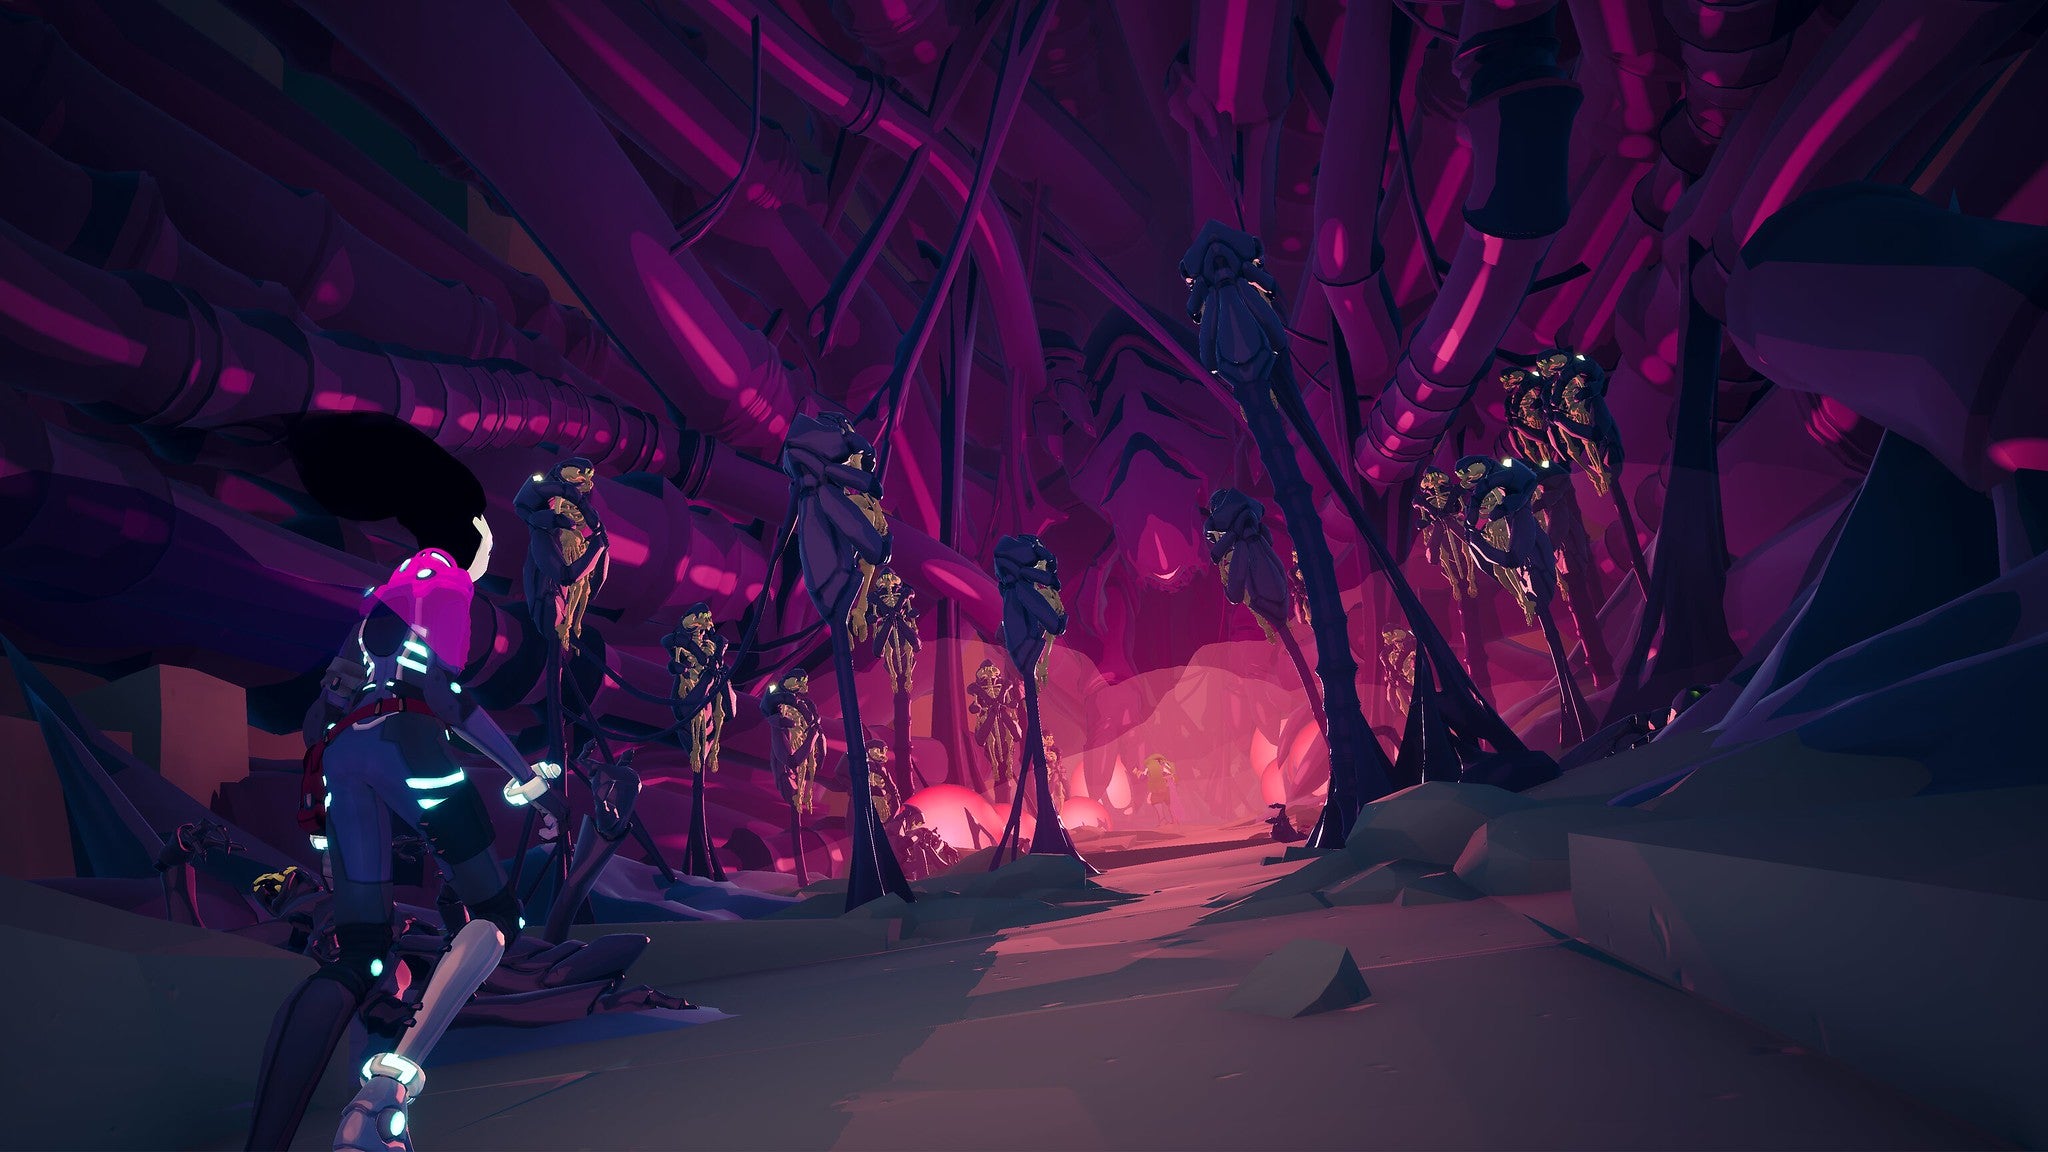 A screenshot of Solar Ash, showing the protagonist in the lower left looking into a pink and purple cave. Tubes, possibly tentacles or spider legs, hug the walls. Skeletons are held aloft, wrapped up in chitinous carcasses of bugs that seem to protrude from the ground on tendons and spikes. Sinster.